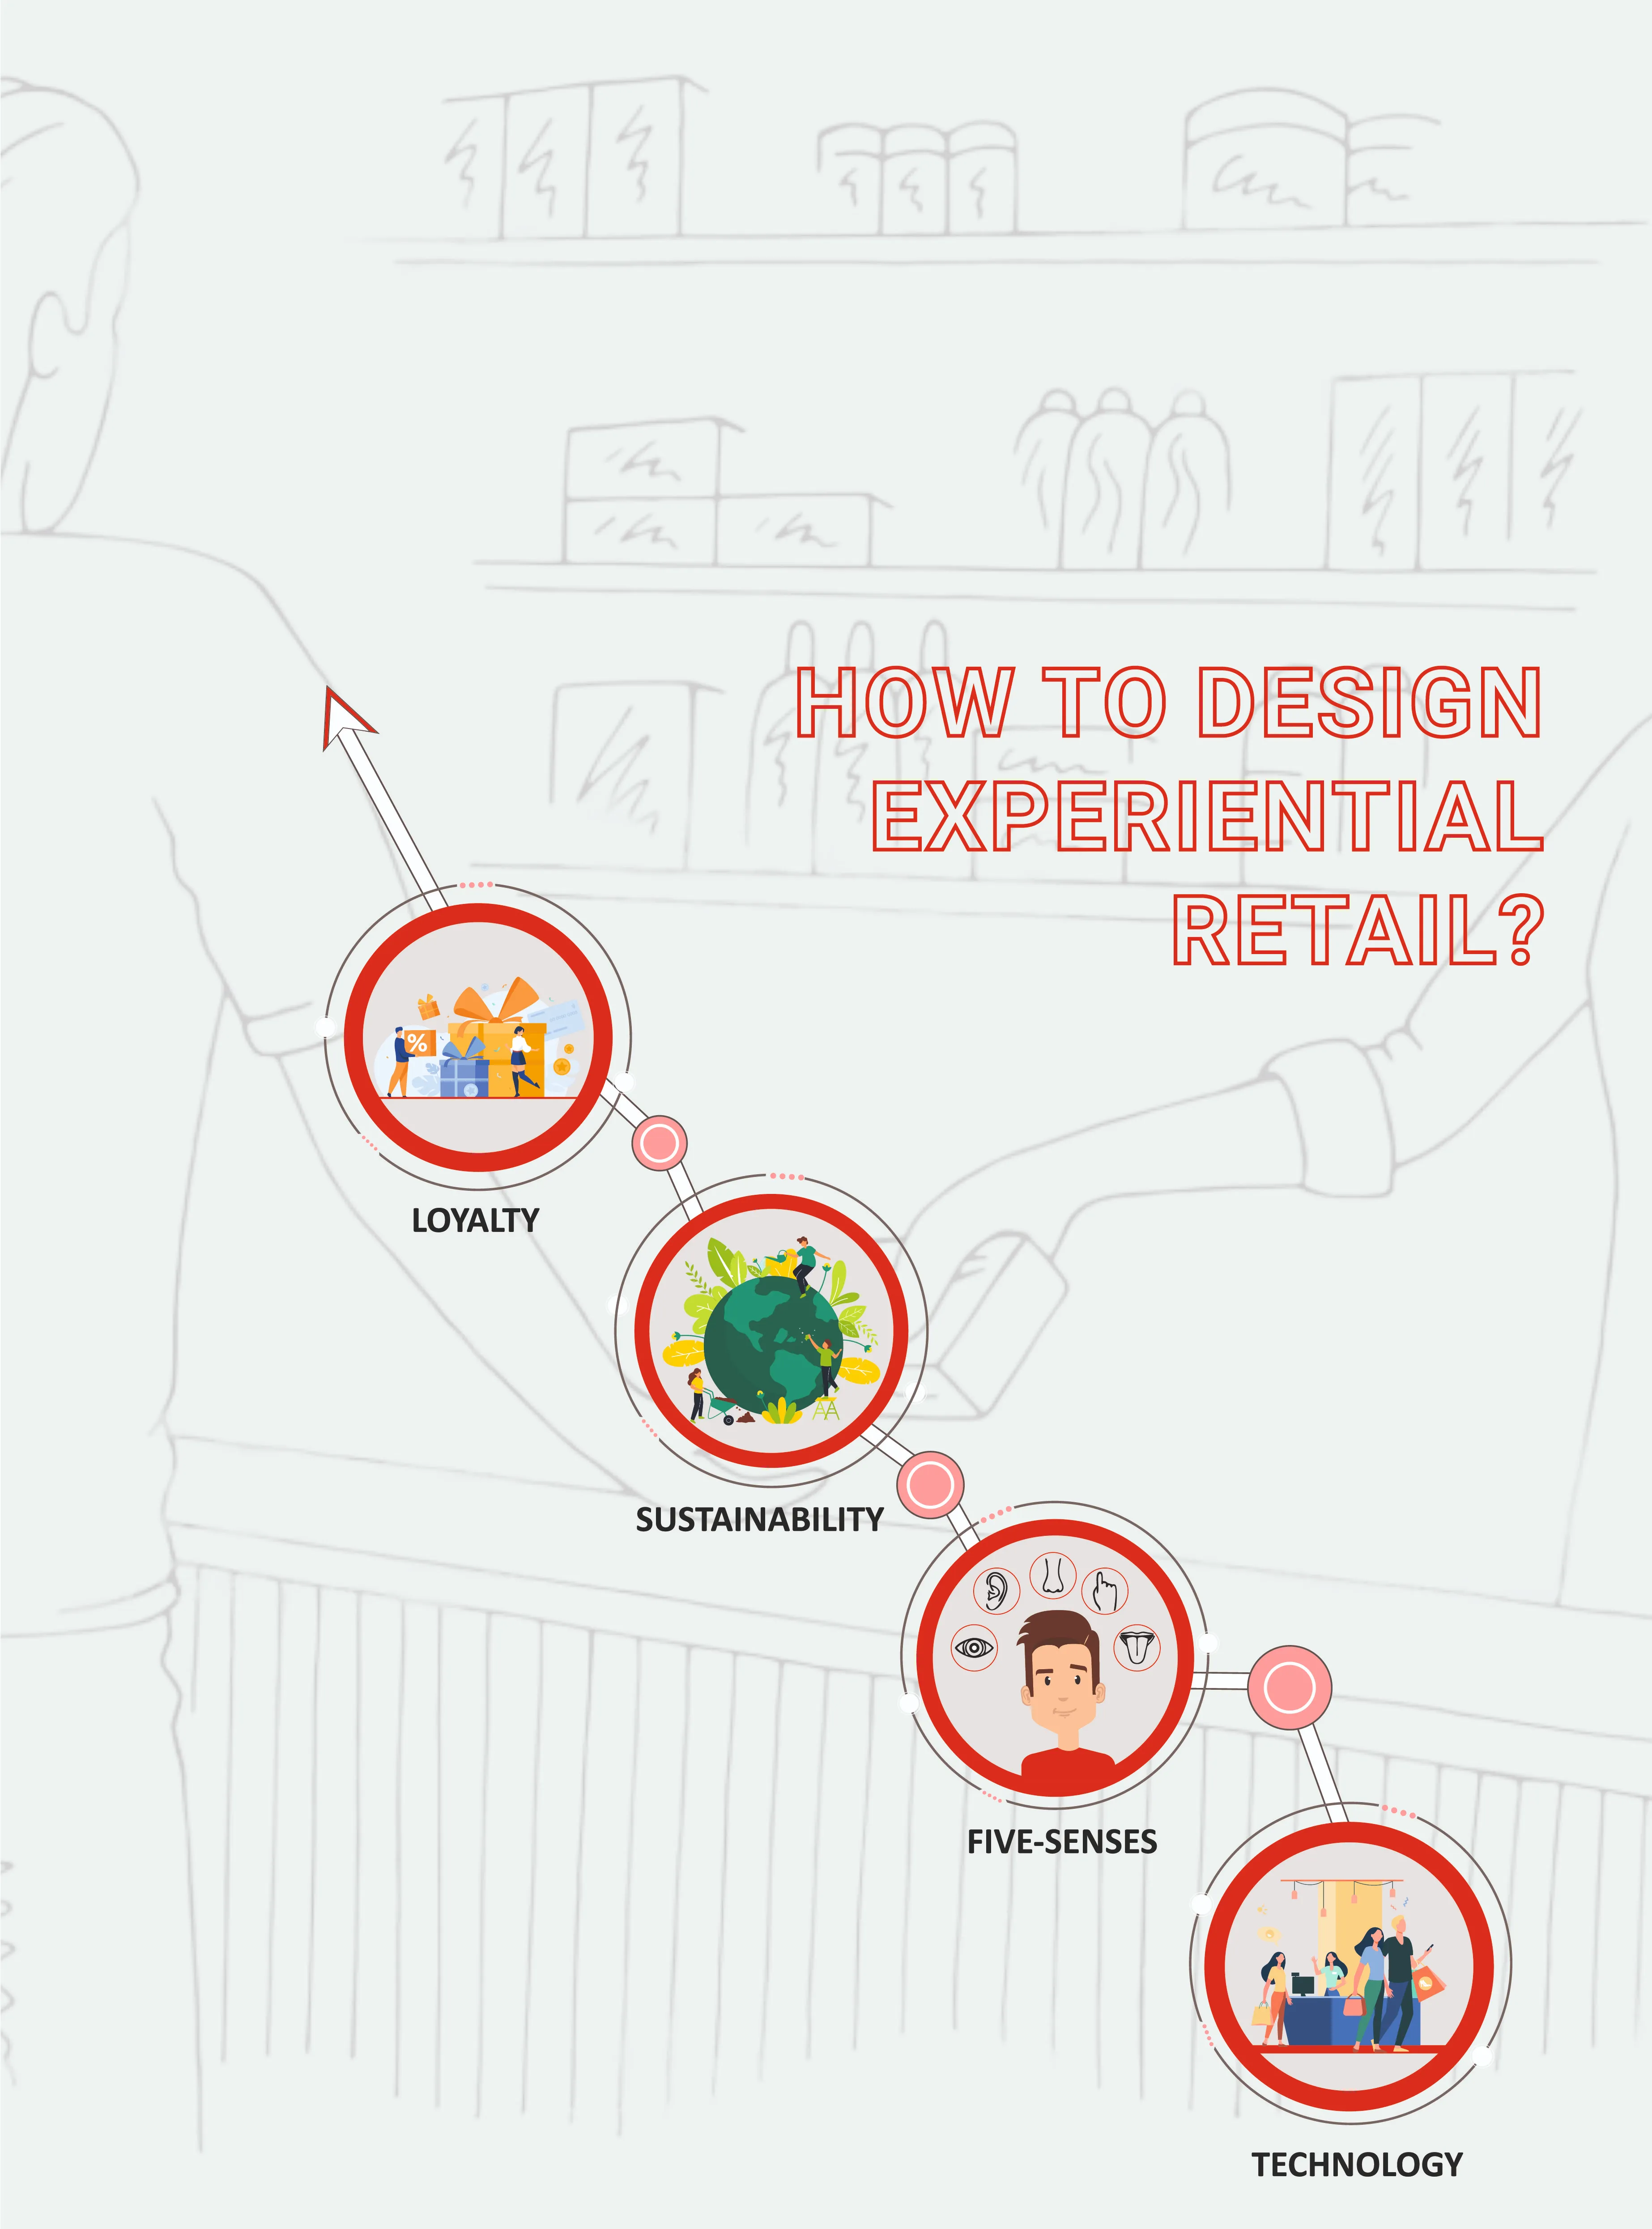 How to design experiential retail